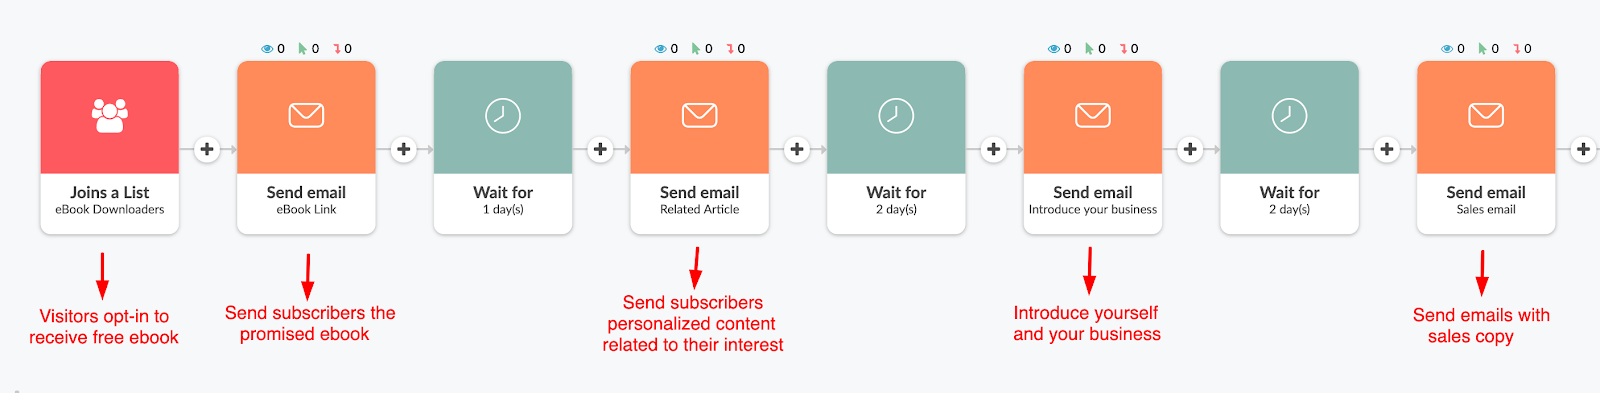 Lead magnet email workflow